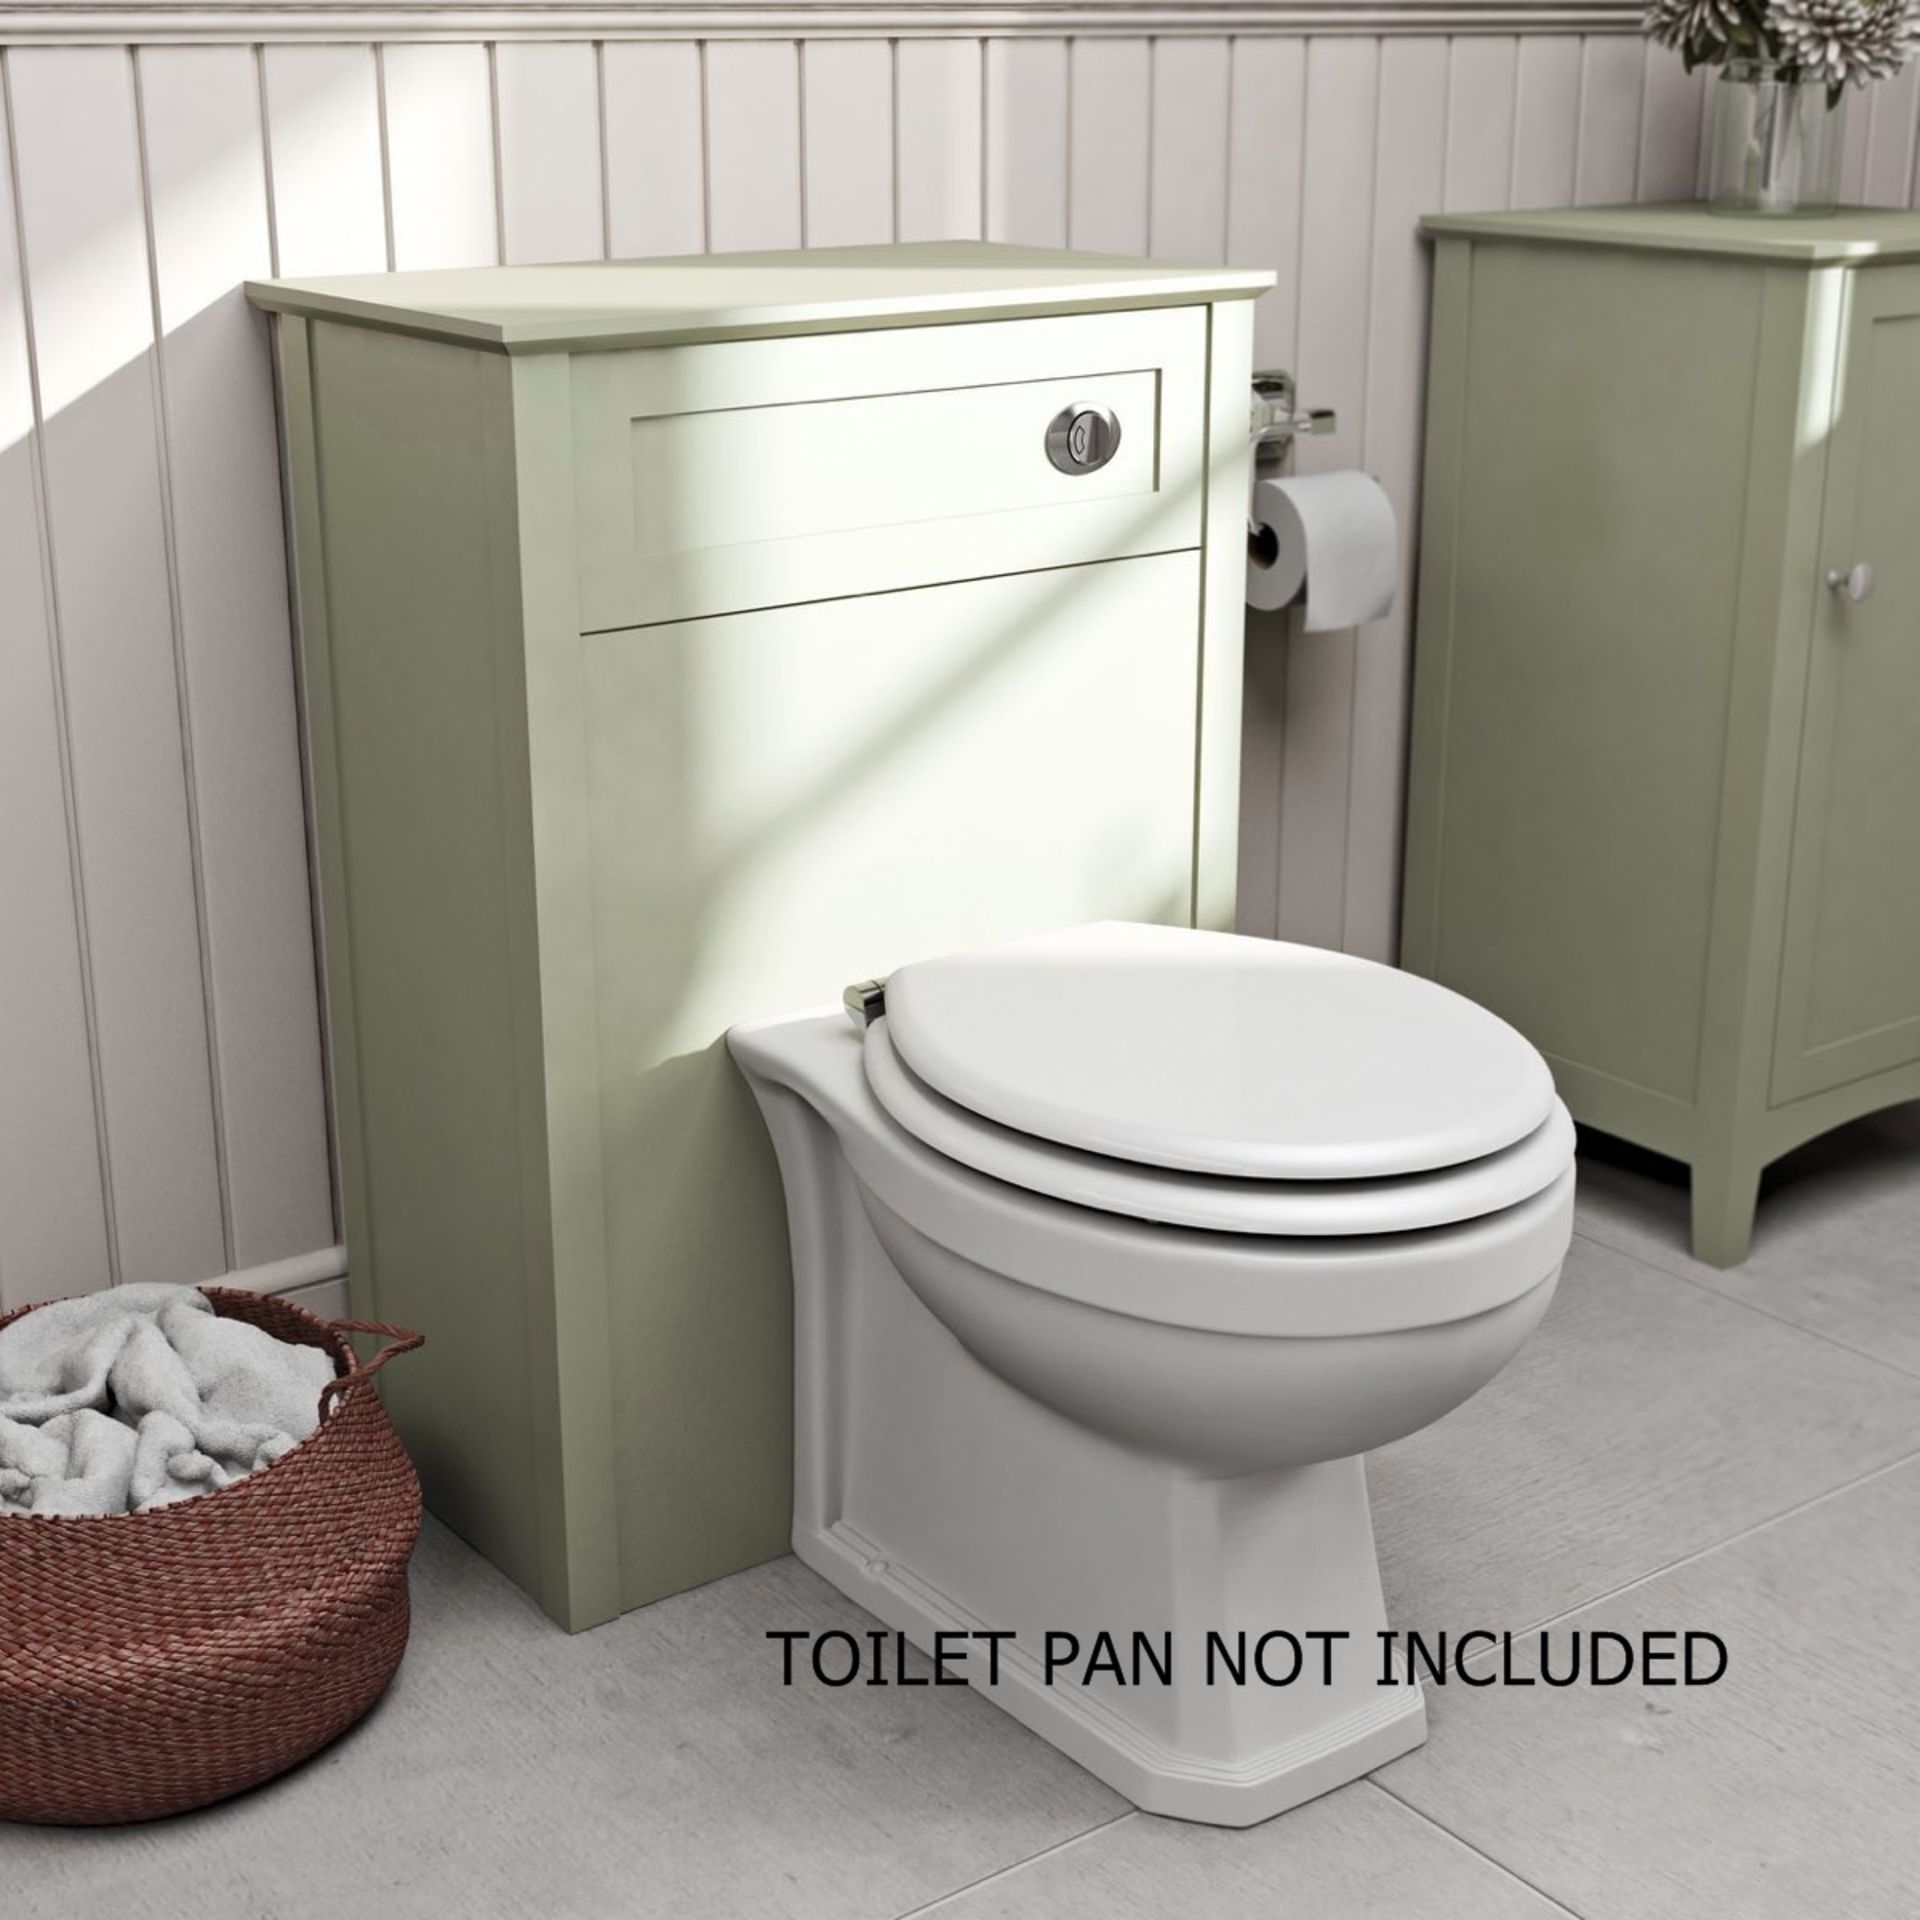 1 x Bath Co Camberley Sage Back to Wall Toilet Pan Unit - Toilet Pan Not Included - H818 x W570 x - Image 2 of 2